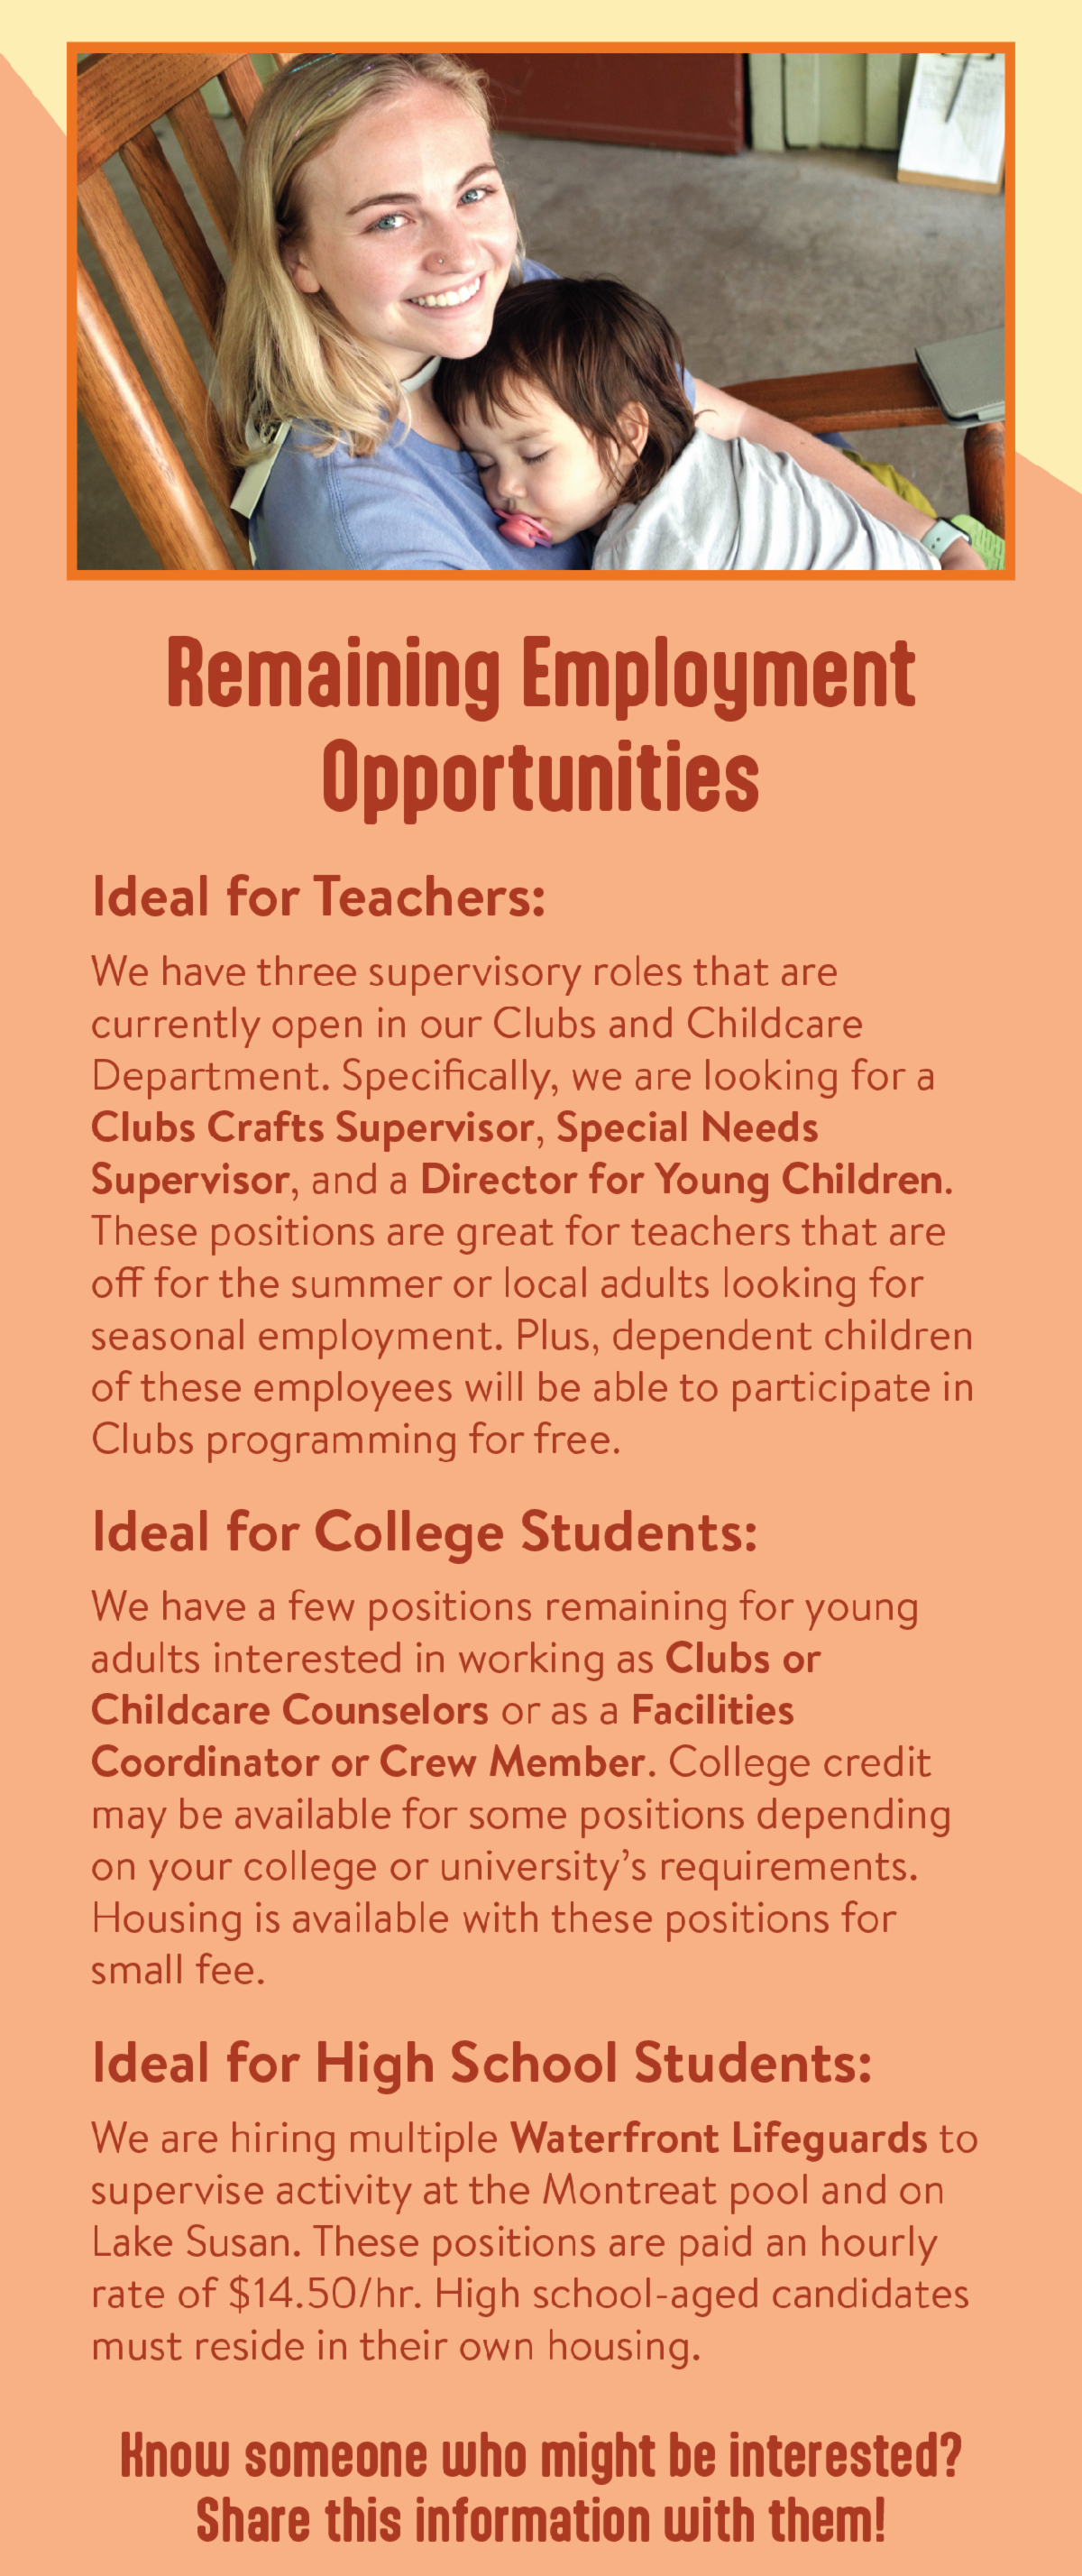 Remaining Employment Opportunities - Ideal for Teachers: We have three supervisory roles that are currently open in our Clubs and Childcare Department. Specifically, we are looking for a Clubs Crafts Supervisor, Special Needs Supervisor, and a Director for Young Children. These positions are great for teachers that are off for the summer or local adults looking for seasonal employment. Plus, dependent children of these employees will be able to participate in Clubs programming for free. Ideal for College Students: We have a few positions remaining for young adults interested in working as Clubs or Childcare Counselors or as a Facilities Coordinator or Crew Member. College credit may be available for some positions depending on your college or university’s requirements. Housing is available with these positions for small fee. Ideal for High School Students: We are hiring multiple Waterfront Lifeguards to supervise activity at the Montreat pool and on Lake Susan. These positions are paid an hourly rate of $14.50/hr. High school-aged candidates must reside in their own housing. Know someone who might be interested? Share this information with them!